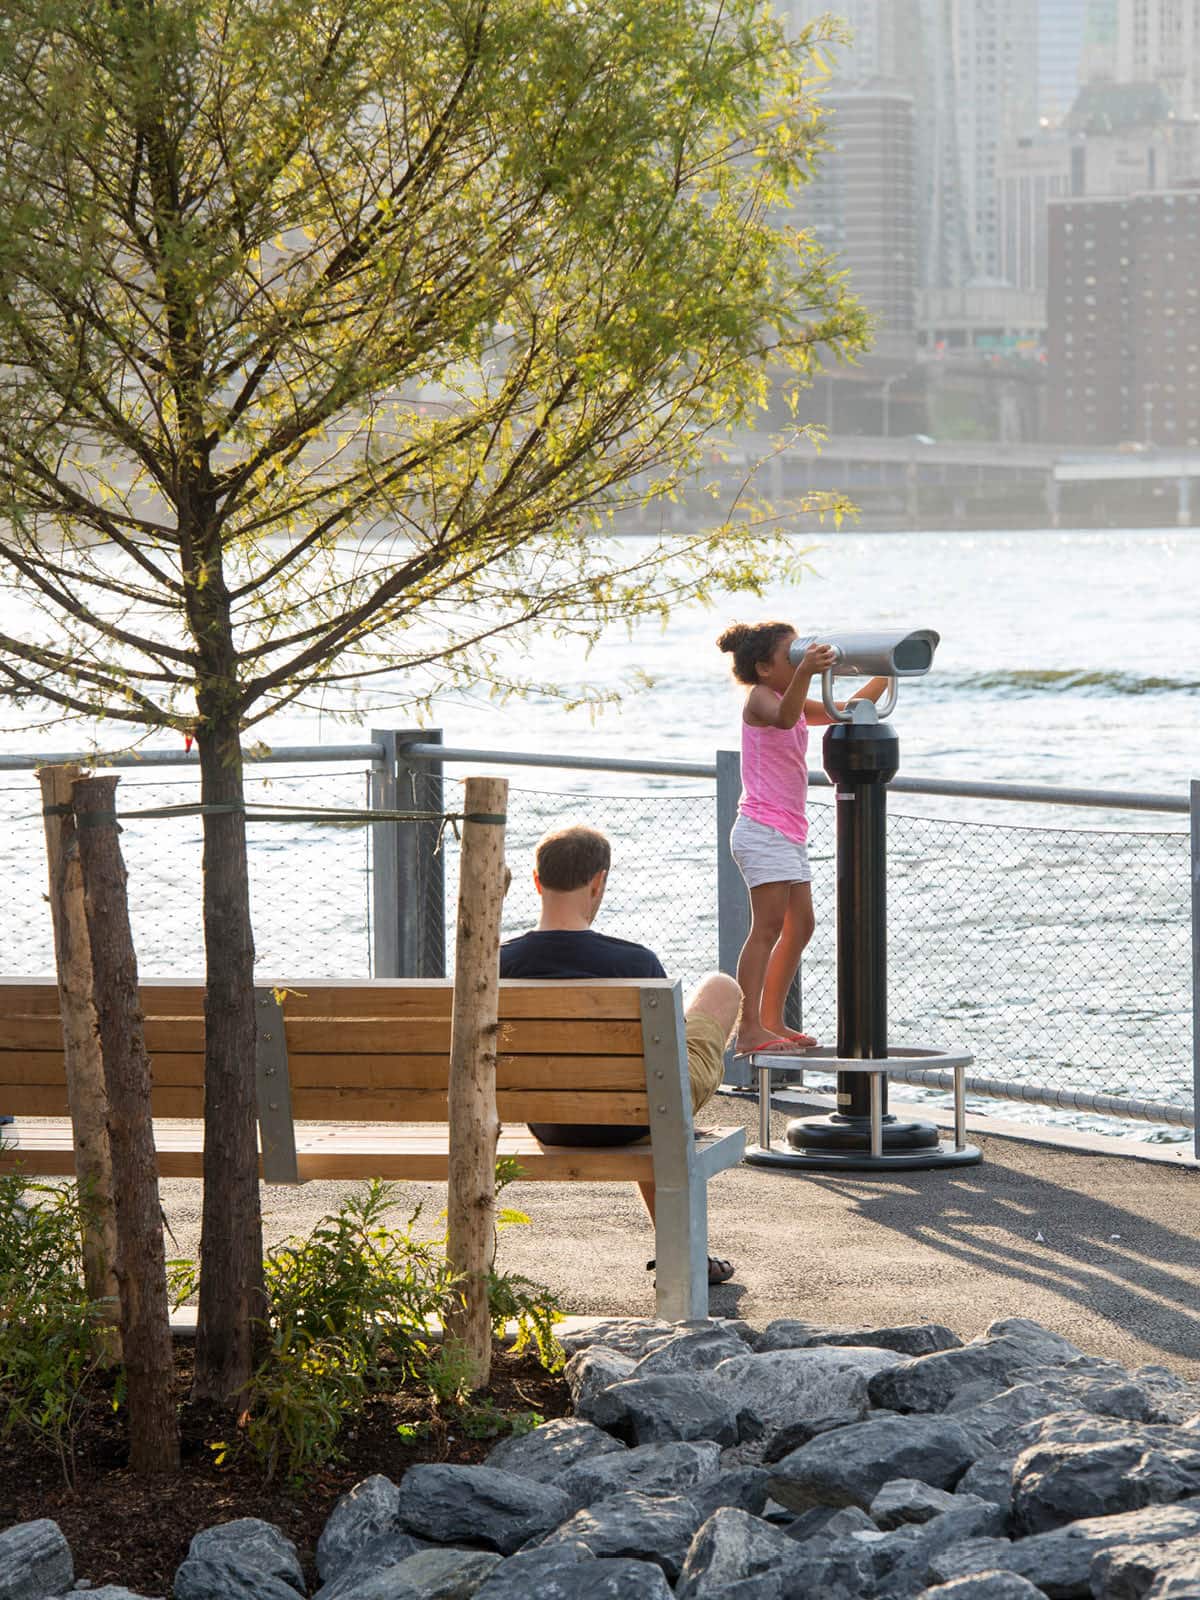 Man sitting on bench and girl looking through binoculars by the water on a sunny day.